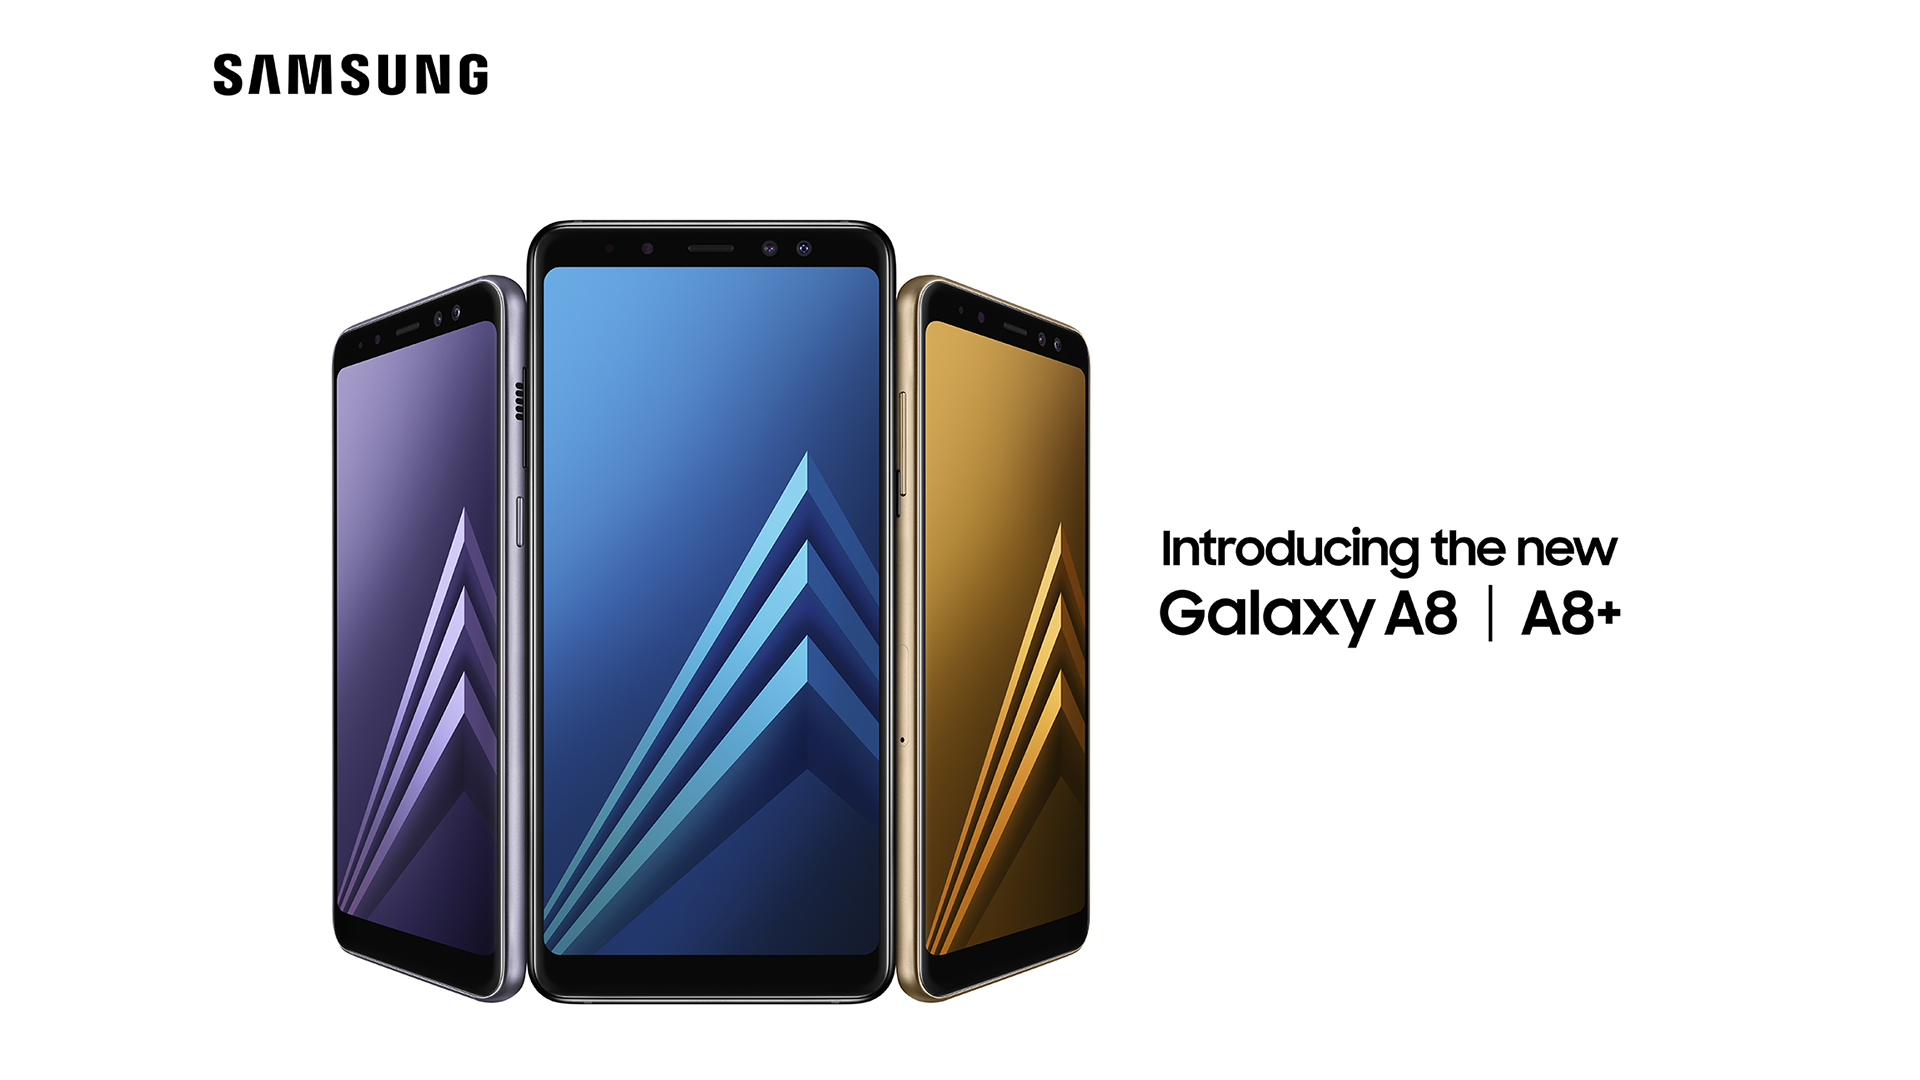 8 reasons why the Samsung Galaxy A8/A8+ will be your new dream phone - 8days